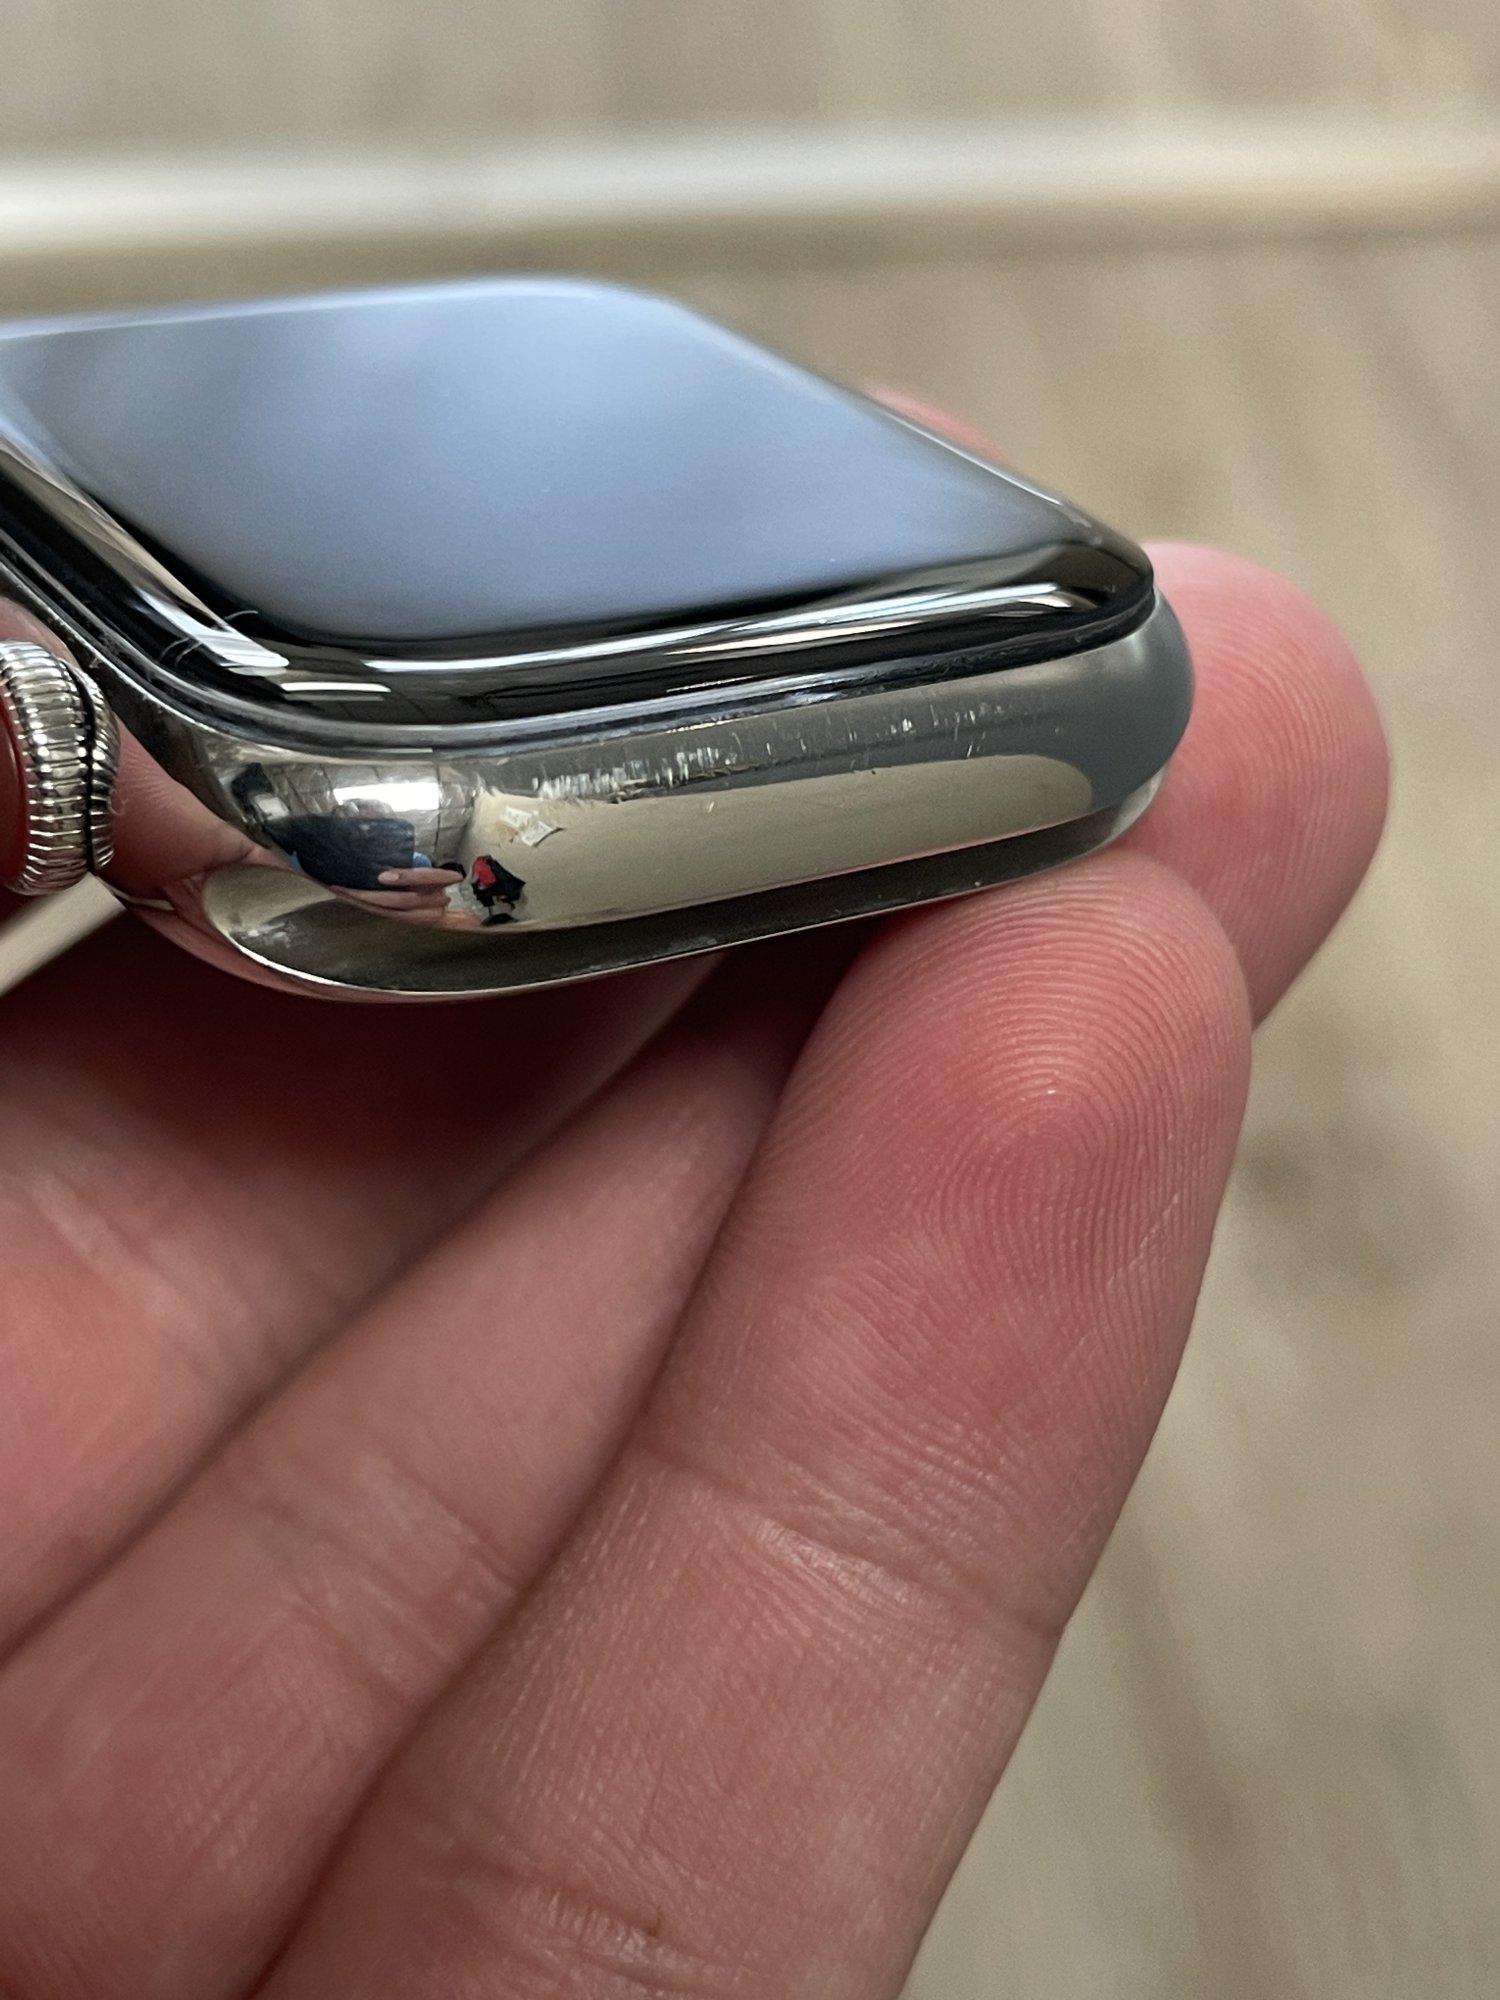 Users discover stainless steel Apple Watch scratches easily, the